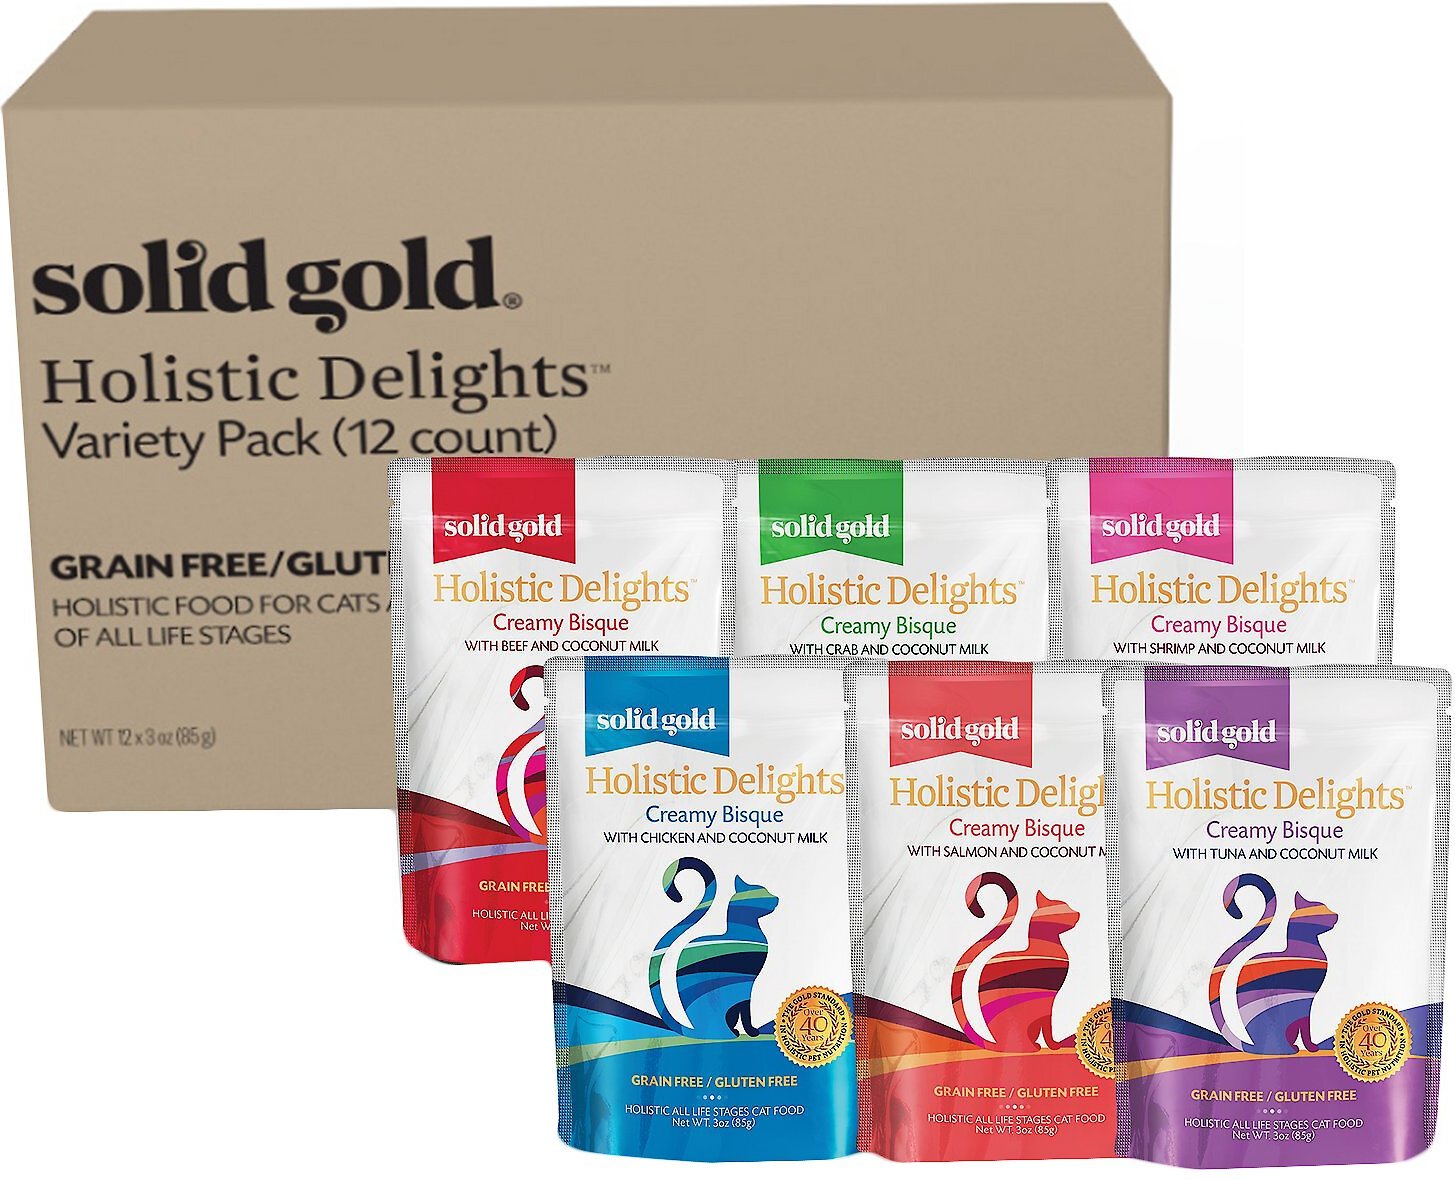 SOLID GOLD Holistic Delights Creamy Bisque with Coconut Milk Variety